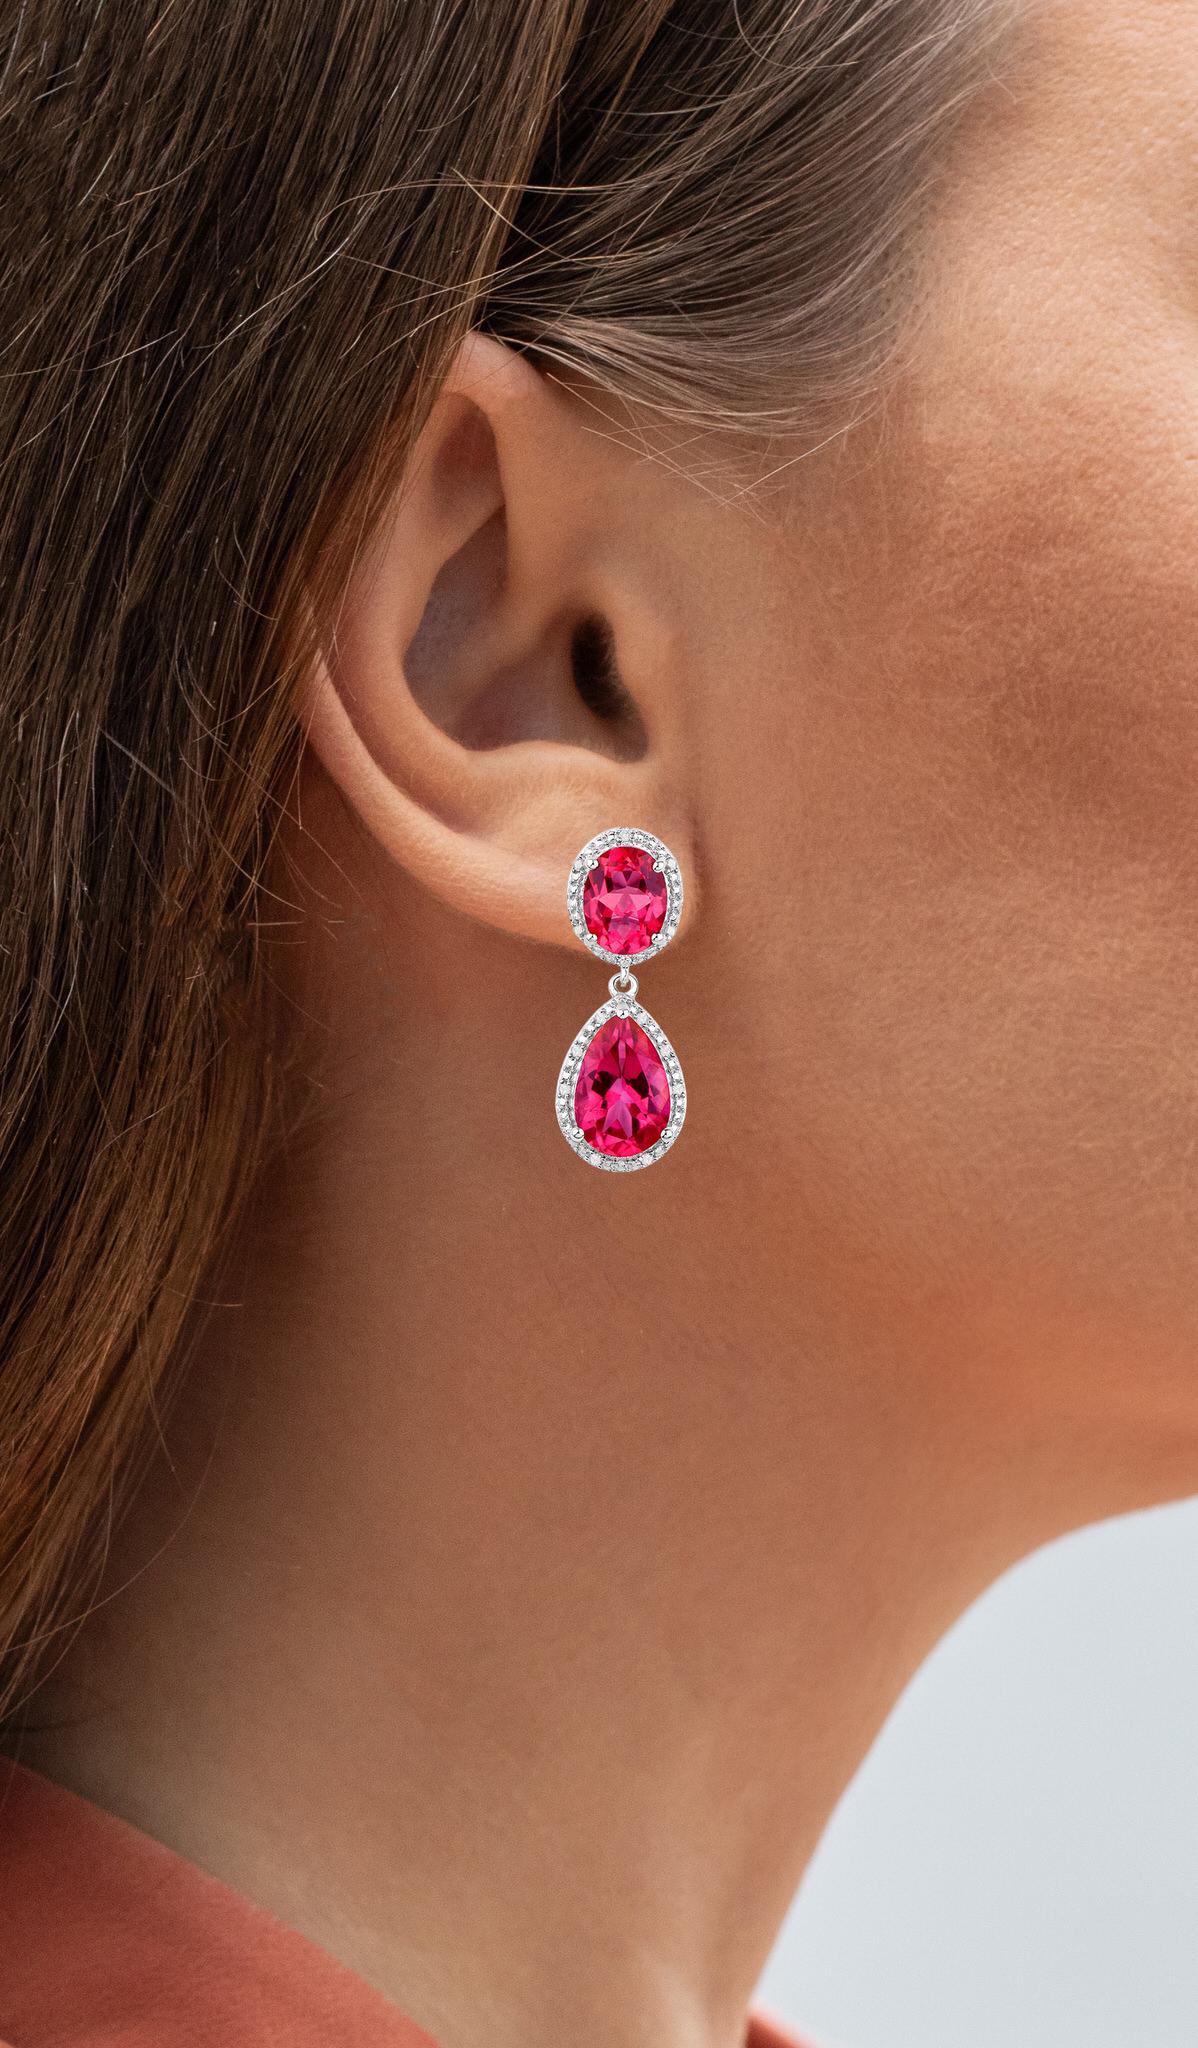 It comes with the Gemological Appraisal by GIA GG/AJP
All Gemstones are Natural
Hot Pink Topazes = 11.20 Carats
Diamonds = 0.15 Carats
Metal: Rhodium Plated Sterling Silver
Dimensions: 30 mm